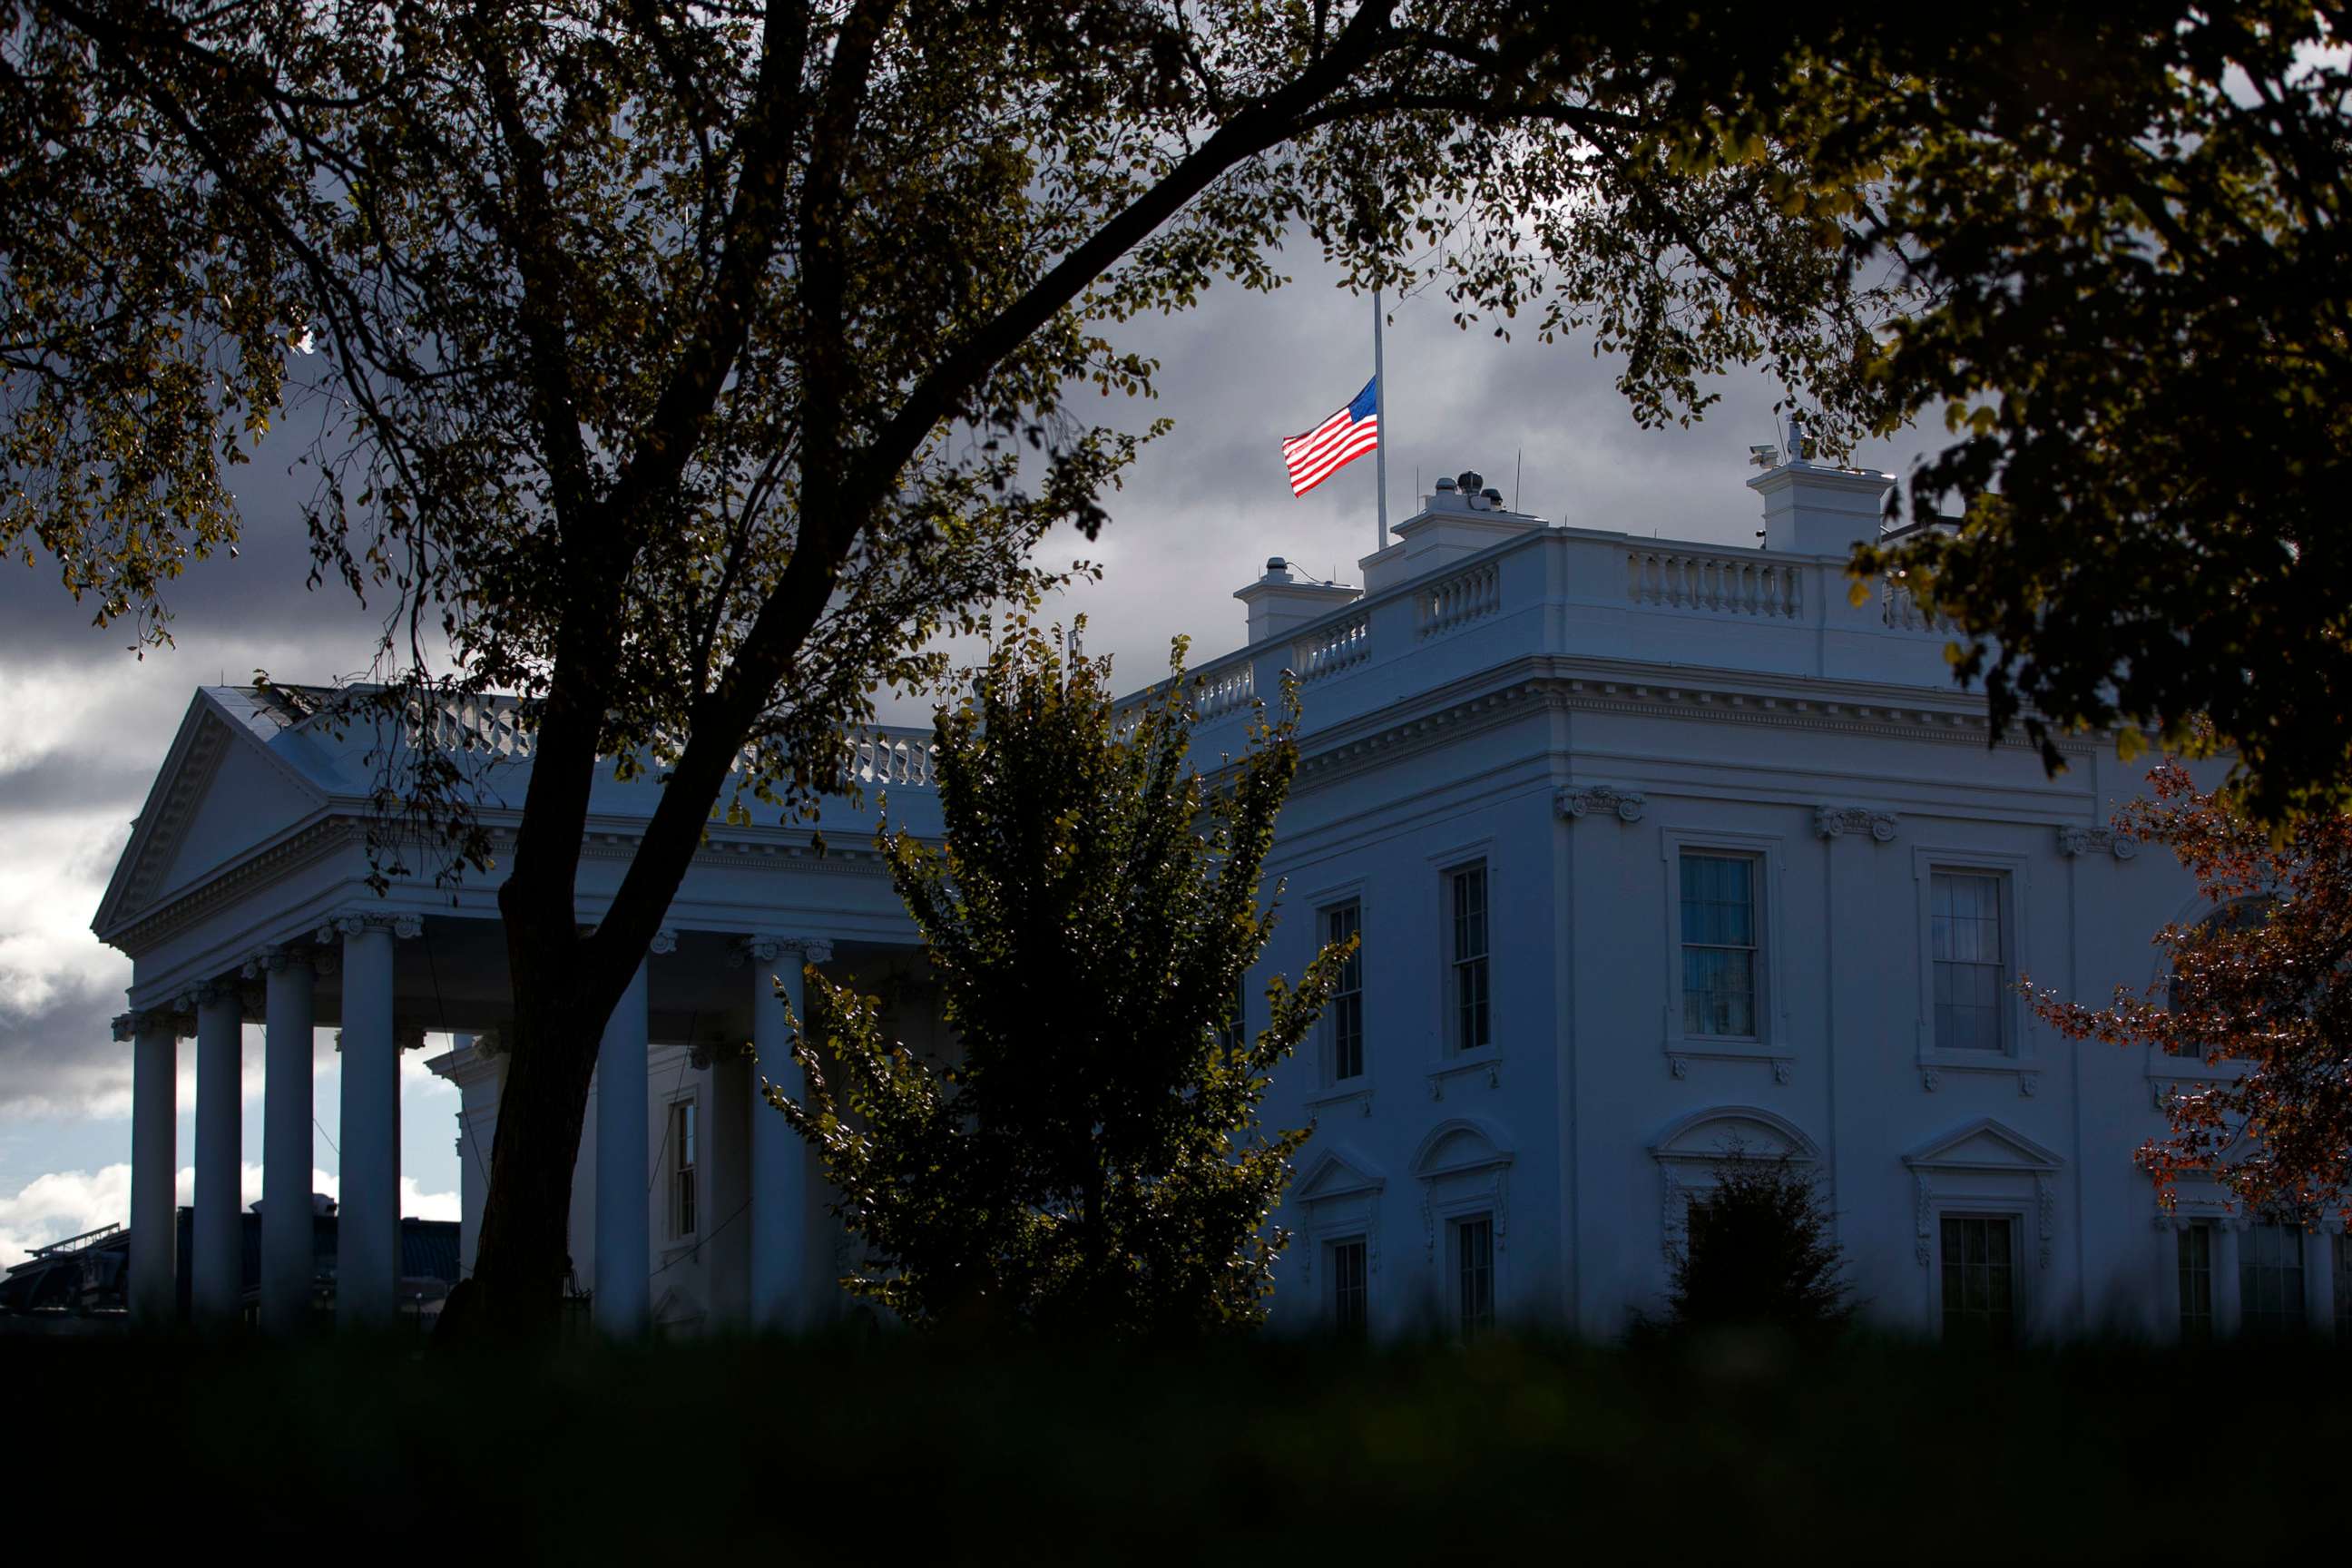 PHOTO: The flag above the White House flies at half-staff honoring Rep. Elijah Cummings, who passed away, Oct. 17, 2019.